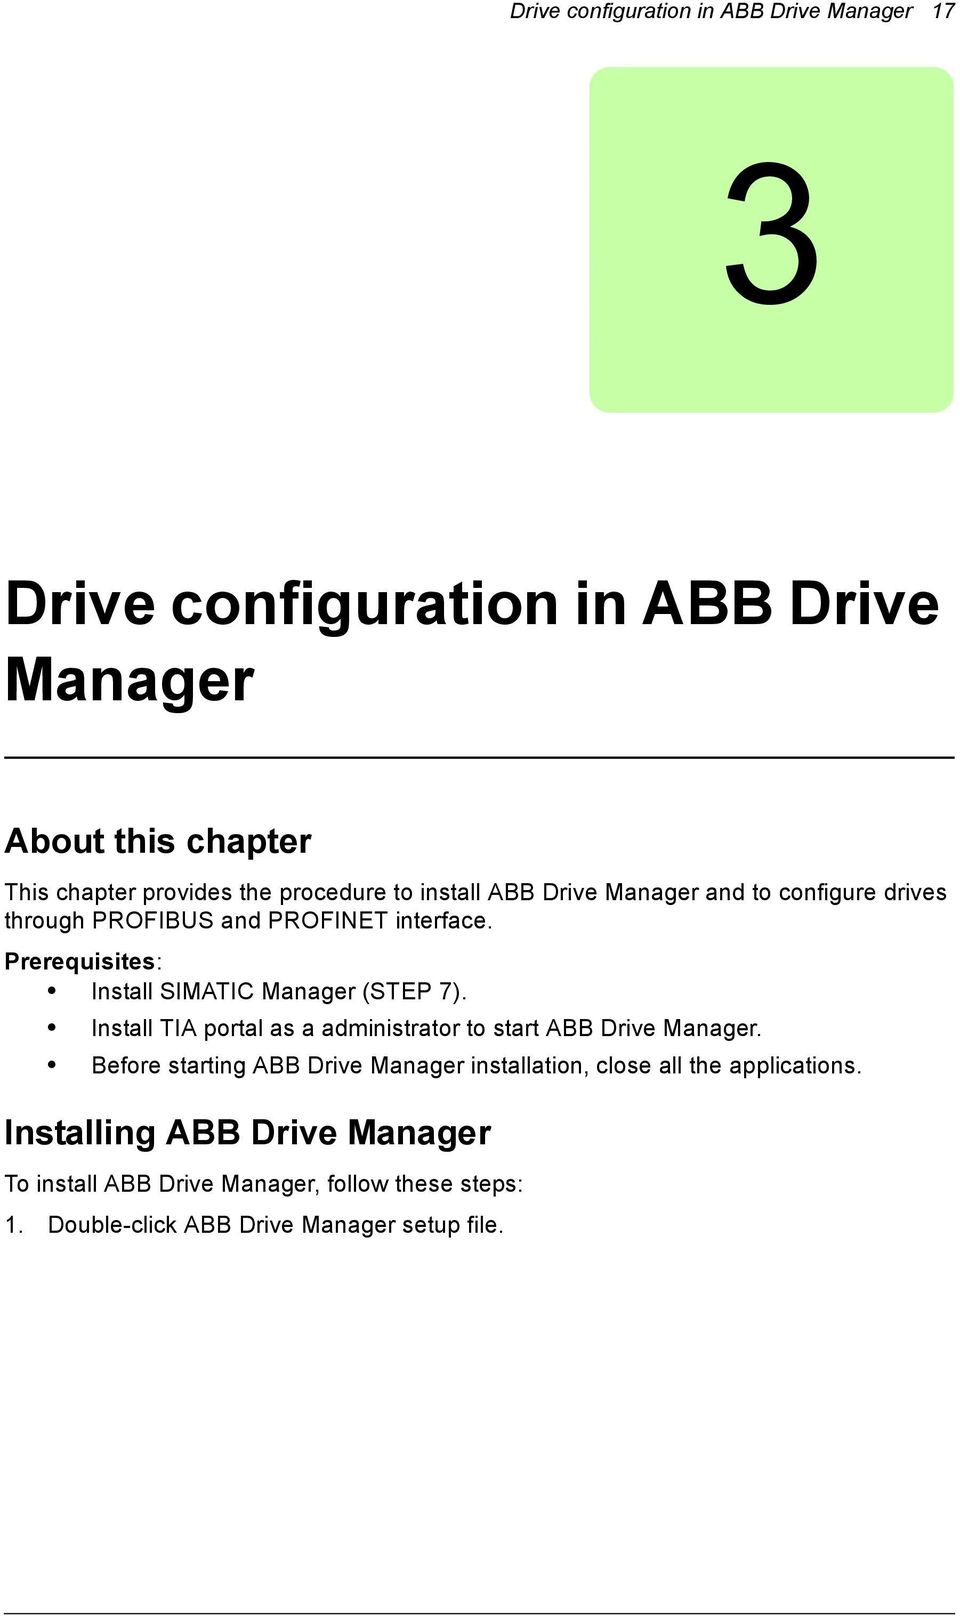 Prerequisites: Install SIMATIC Manager (STEP 7). Install TIA portal as a administrator to start ABB Drive Manager.